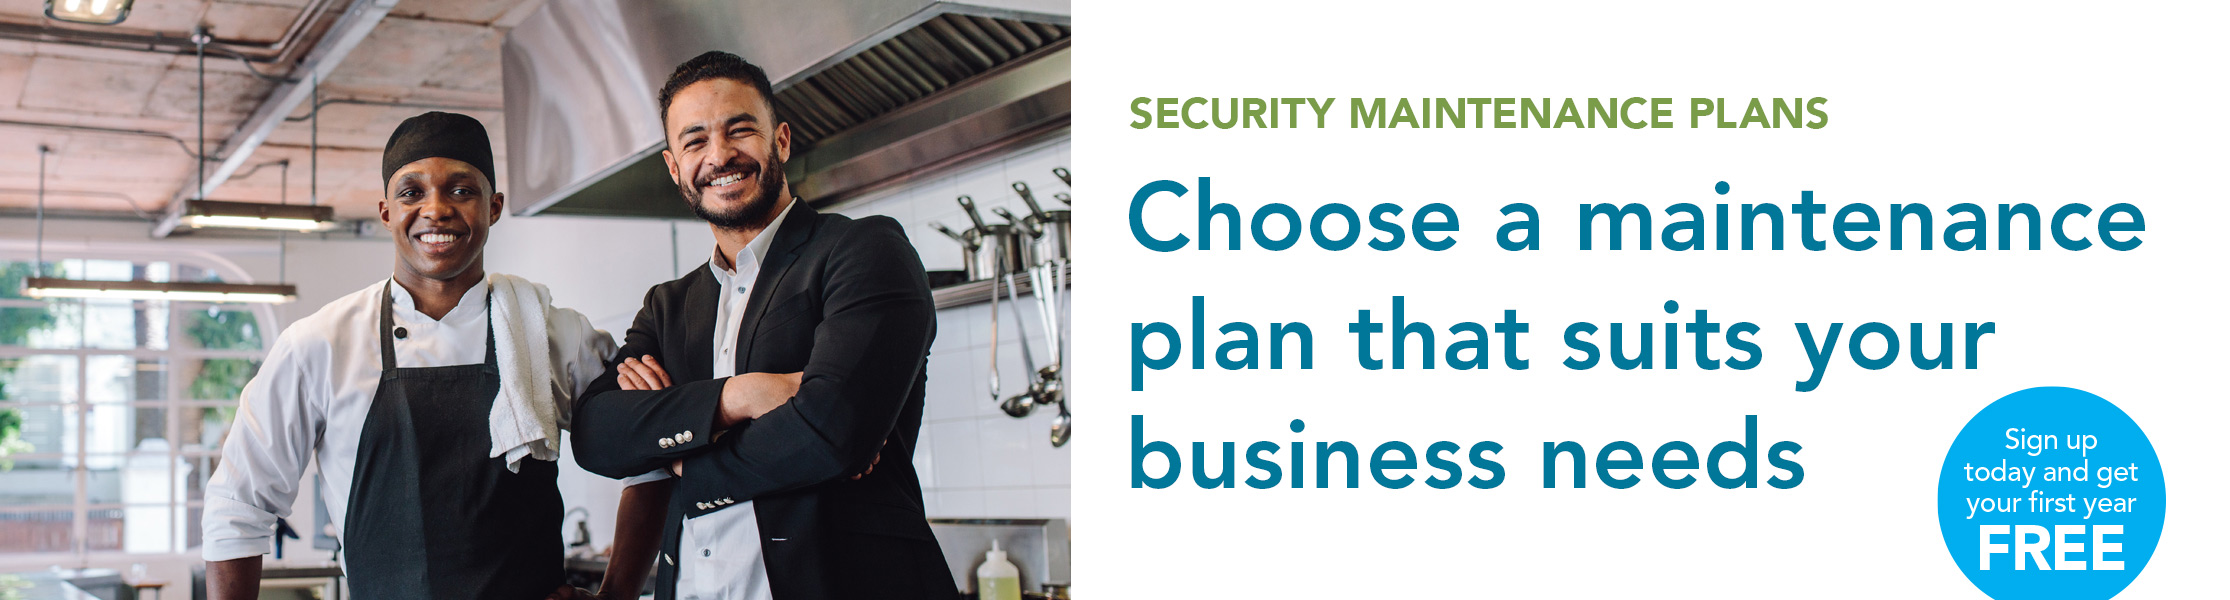 Choose a maintenance agreement that suites your business needs